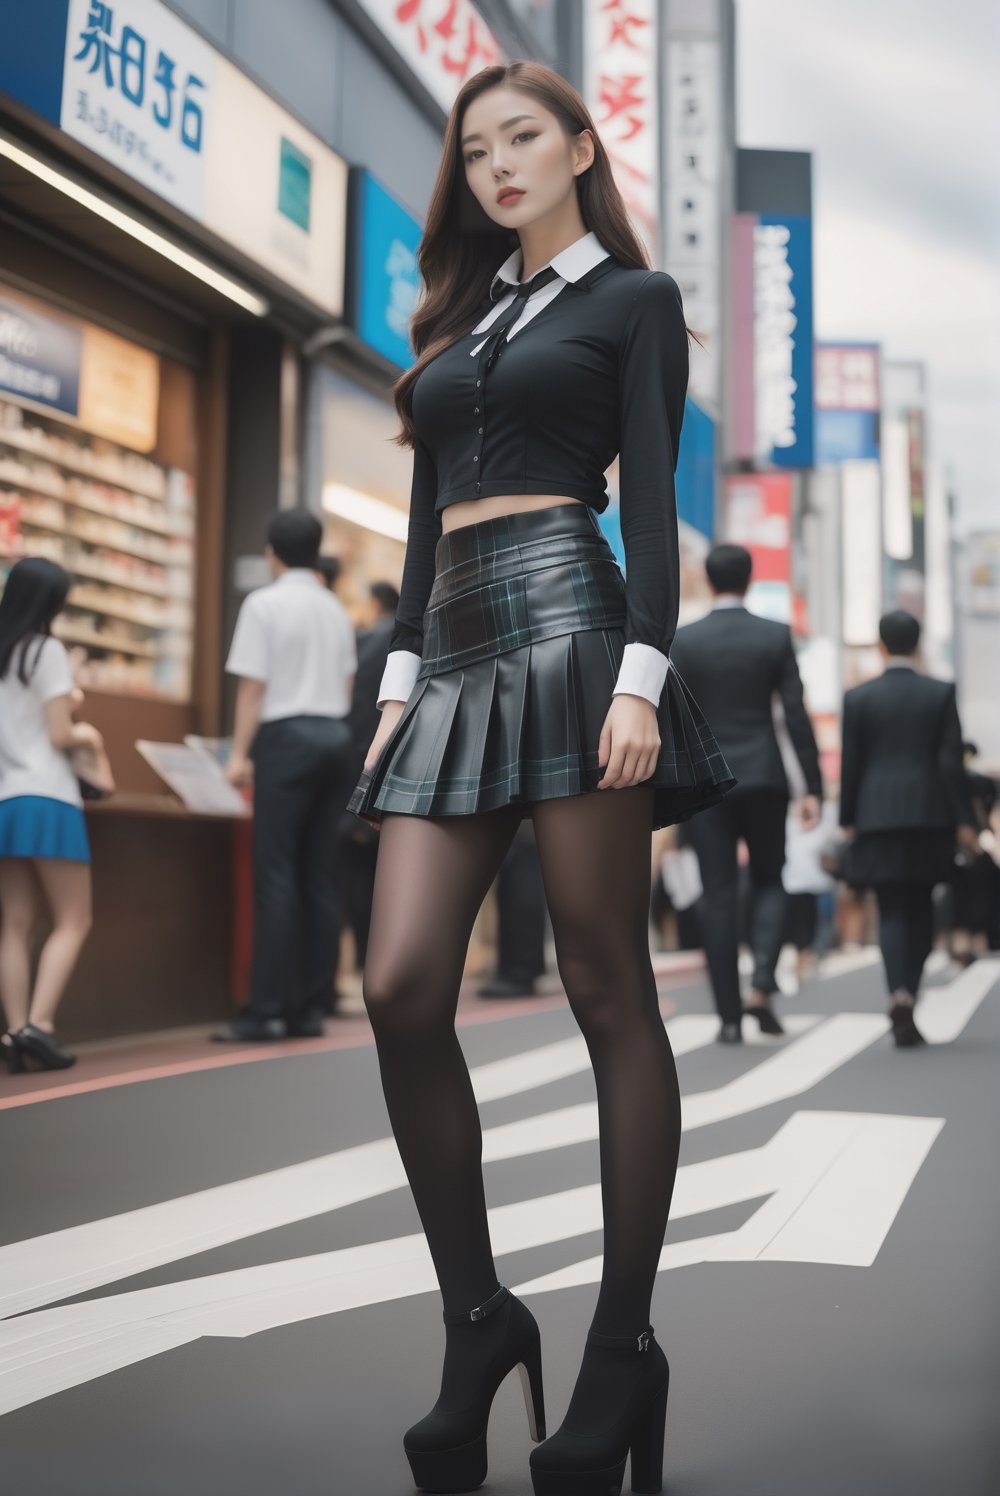 vogue cover, (full body shot) with low view angle, ultra_wide_angle lens, hyperrealistic:1.4, a 15-years-old astonishingly gorgeous girl wearing (platform gothic high heel):1.1), (ethereal beautiful face):1.4, (perfect face):1.1, walking in a Akihabara, black business shirt, kilt miniskirt, (black leggings):1.4, attractive body, a sexy secretary, perfect model body, award-winning photography